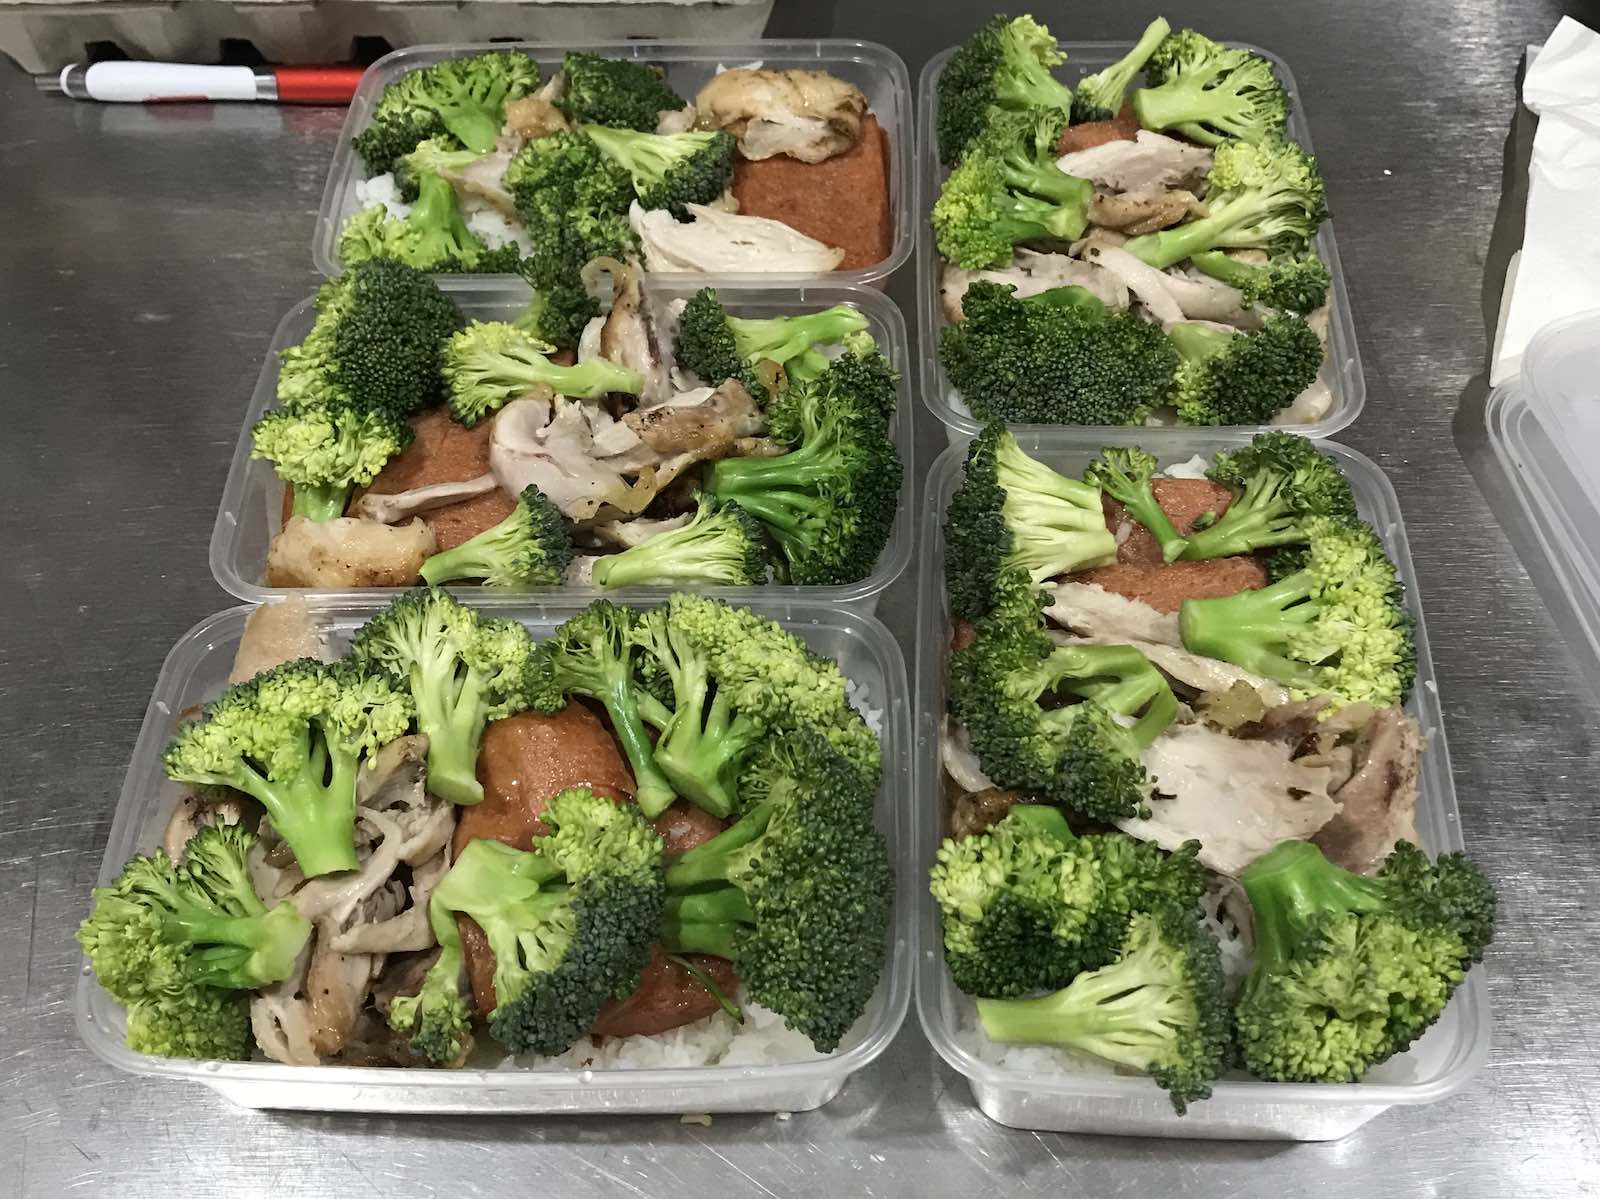 Meal prepped for the rest of the week during my first night in Sydney. It's an expensive city and I didn't want to spend much on food here.